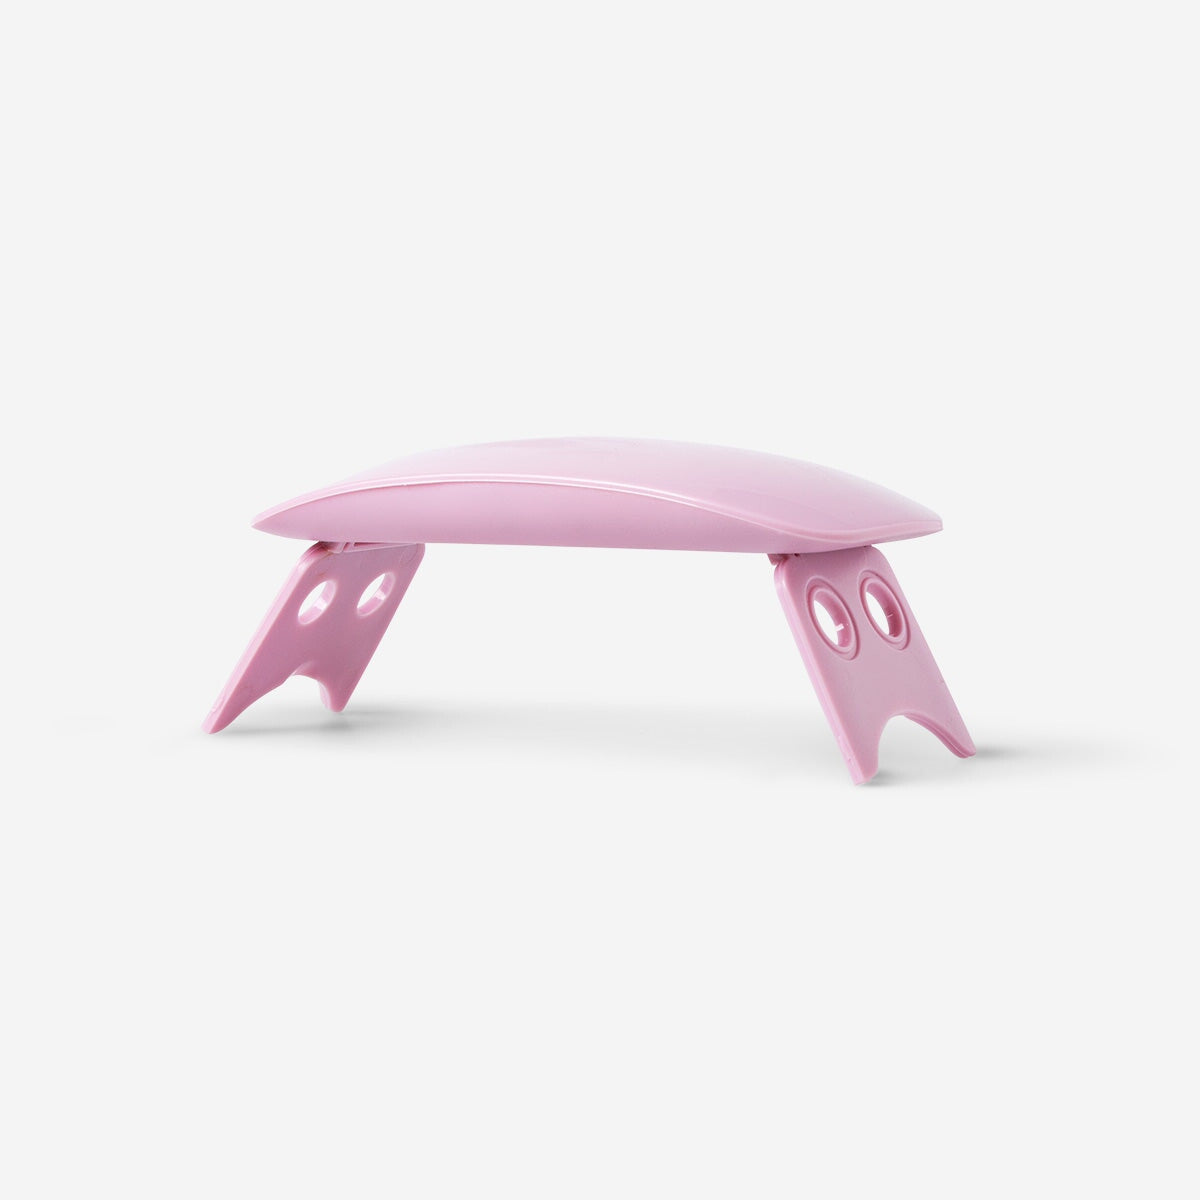 Nail lamp Personal care Flying Tiger Copenhagen 